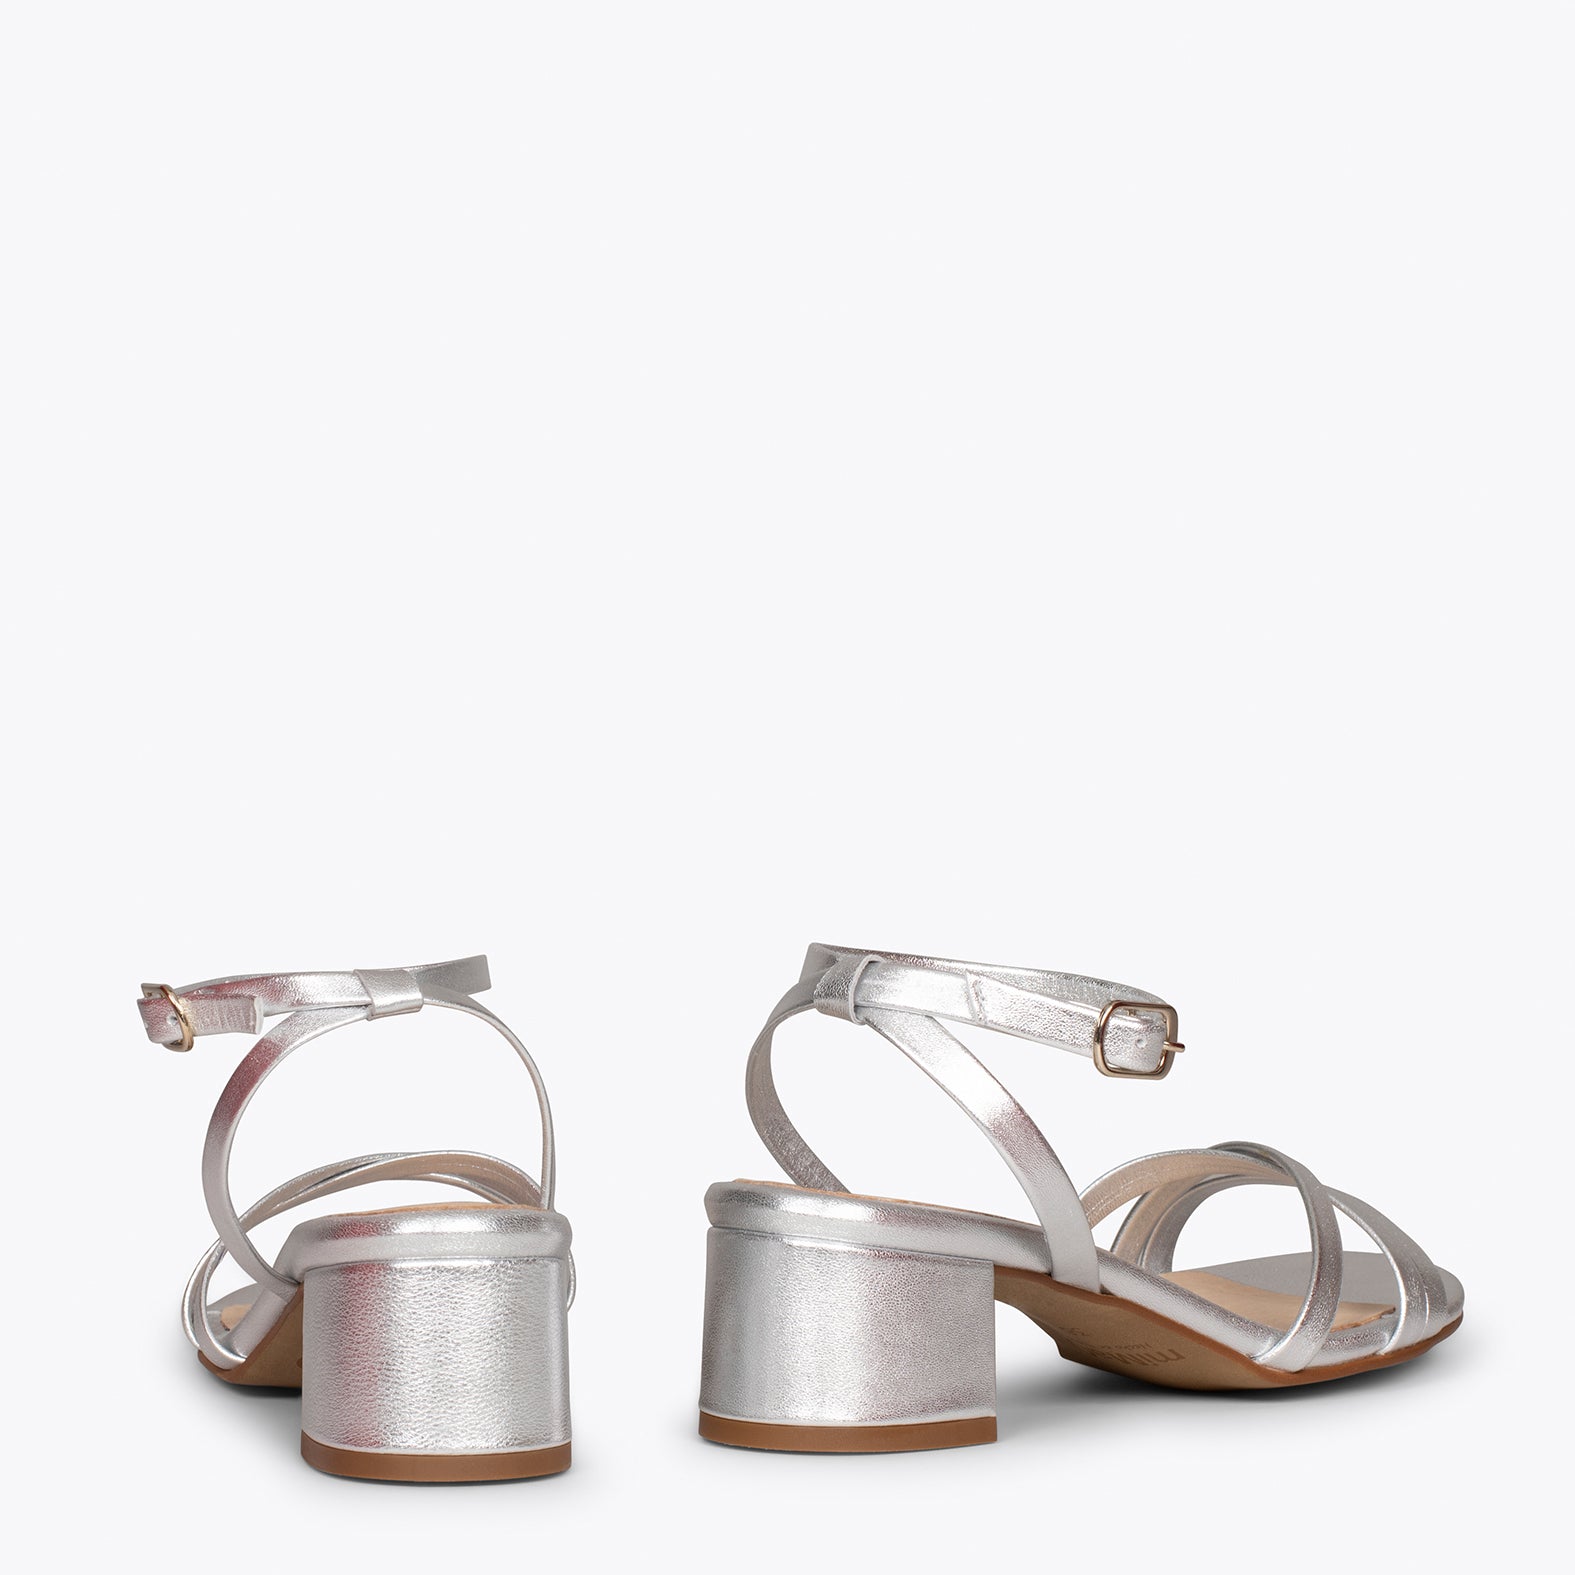 VIENA – SILVER sandals with straps